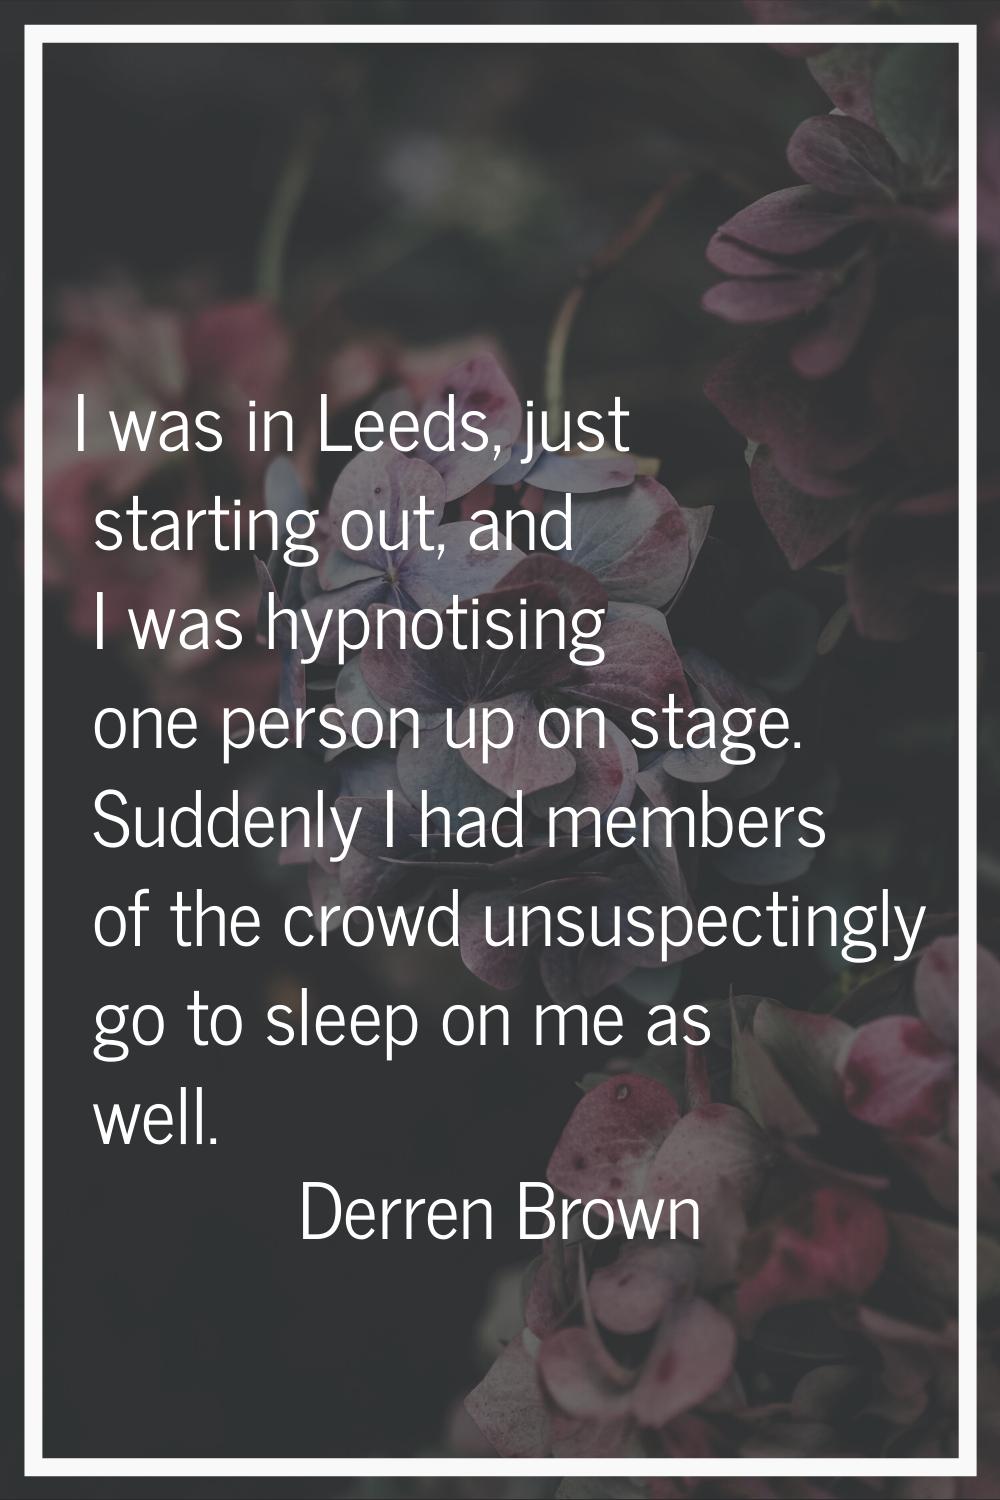 I was in Leeds, just starting out, and I was hypnotising one person up on stage. Suddenly I had mem